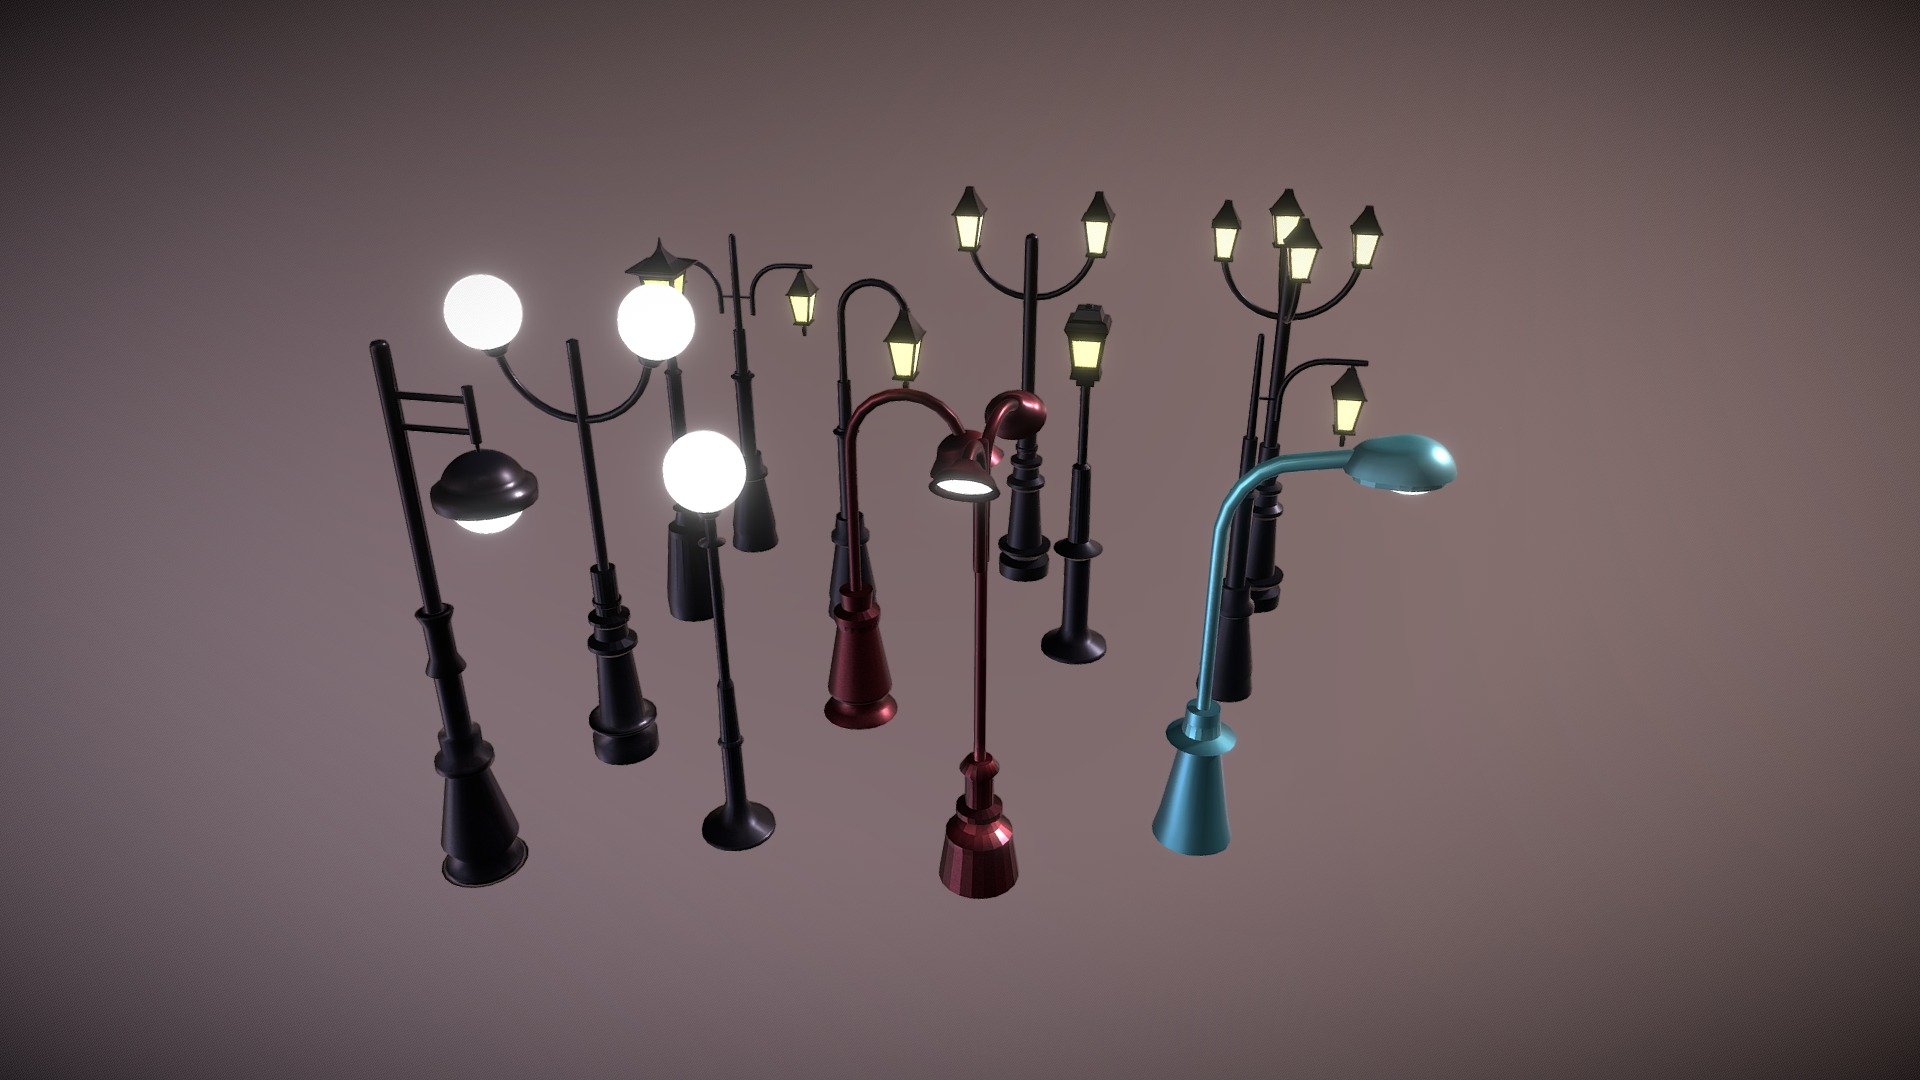 Light up your scene with this beautiful streetlights set!
Models were handpainted using 3dCoat and modeled on maya.

All lamps share the same texture atlas 3d model